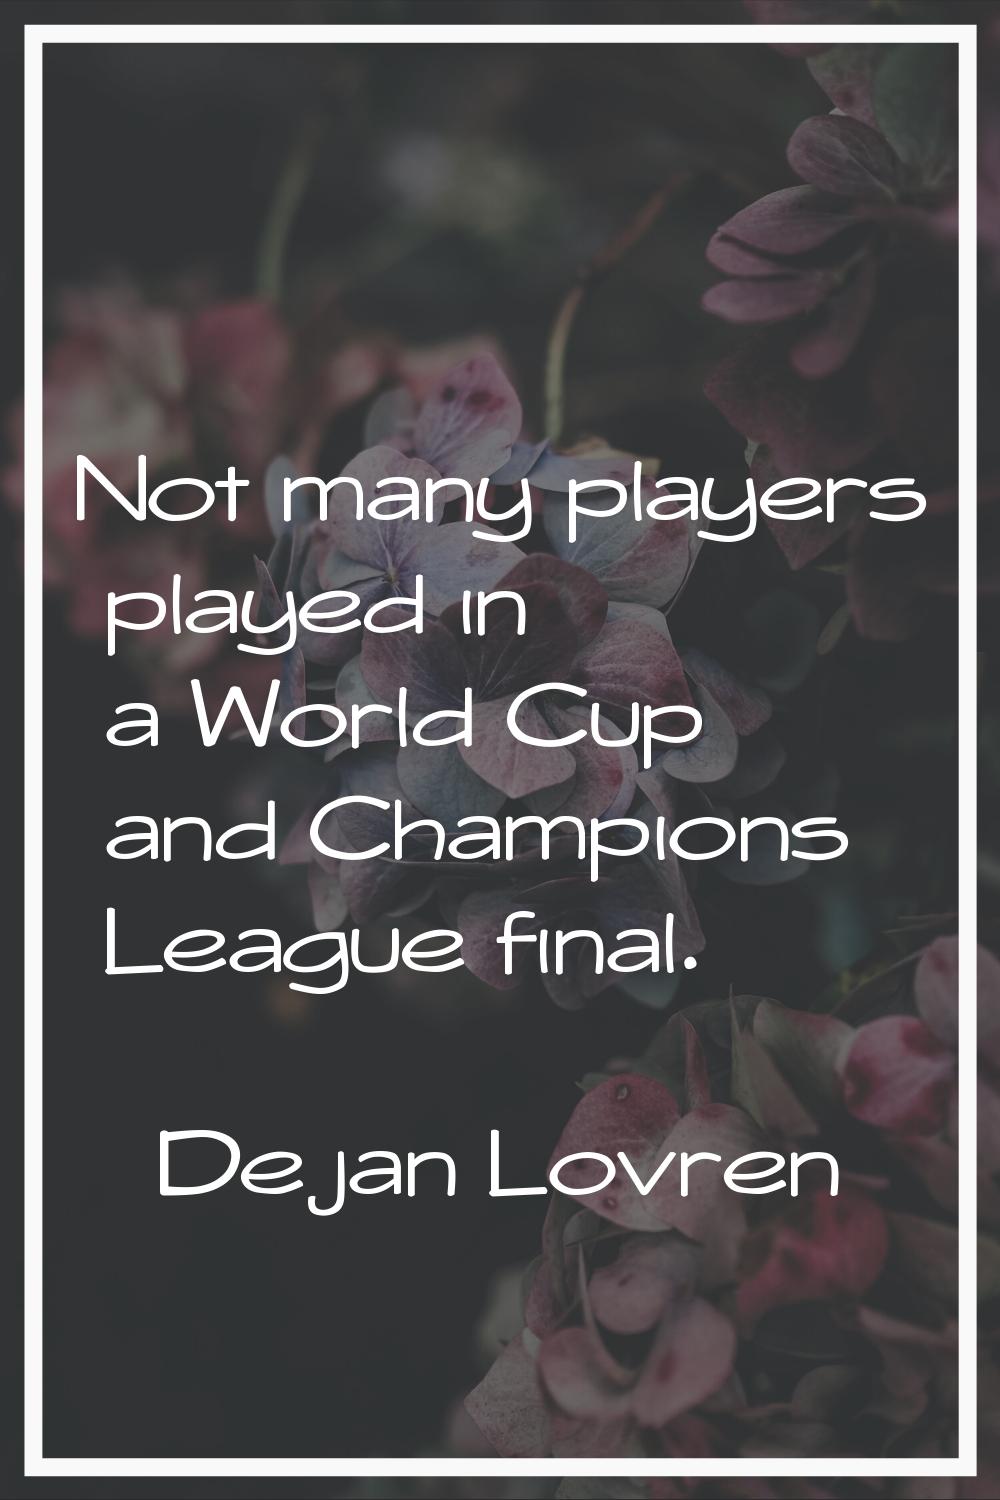 Not many players played in a World Cup and Champions League final.